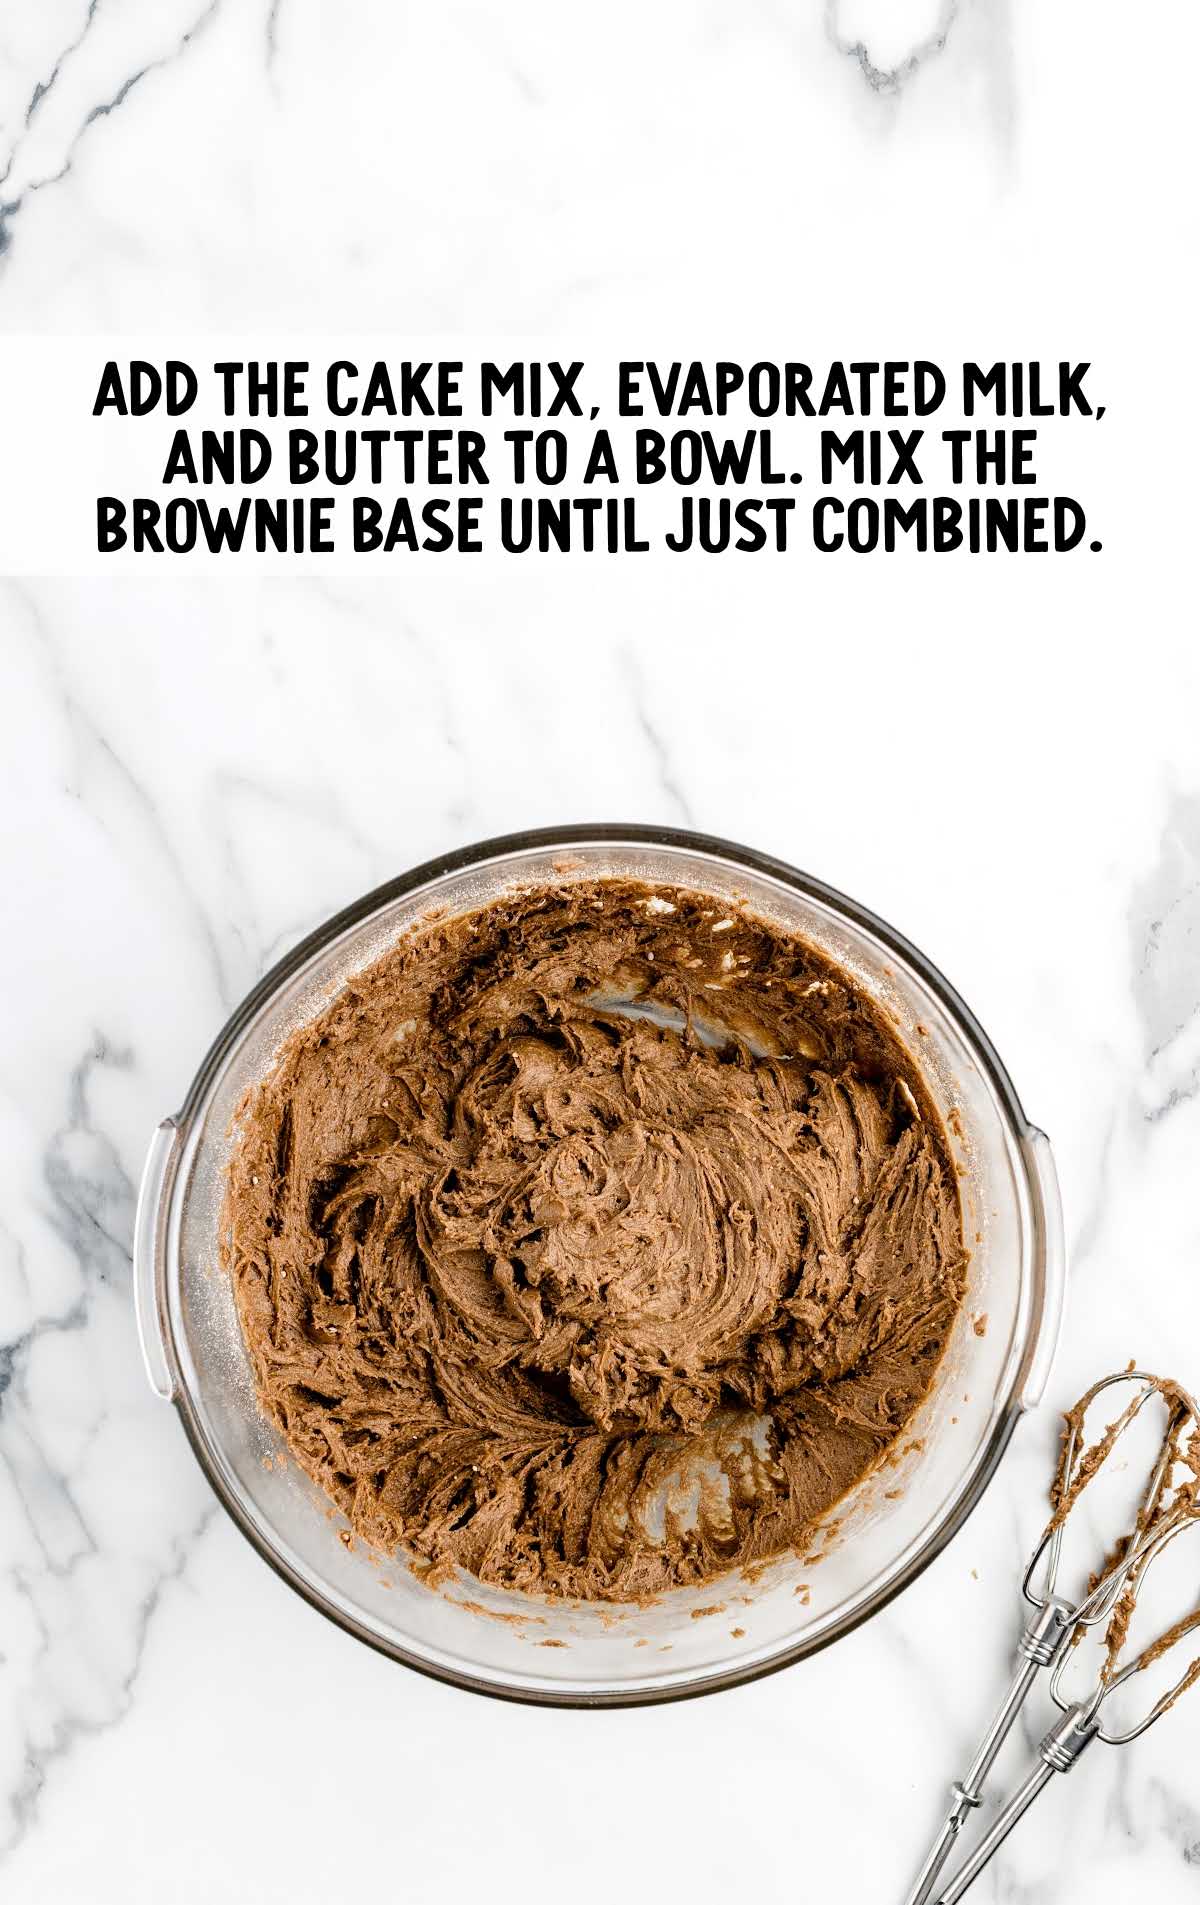 cake mix, evaporated milk, and butter added to a bowl